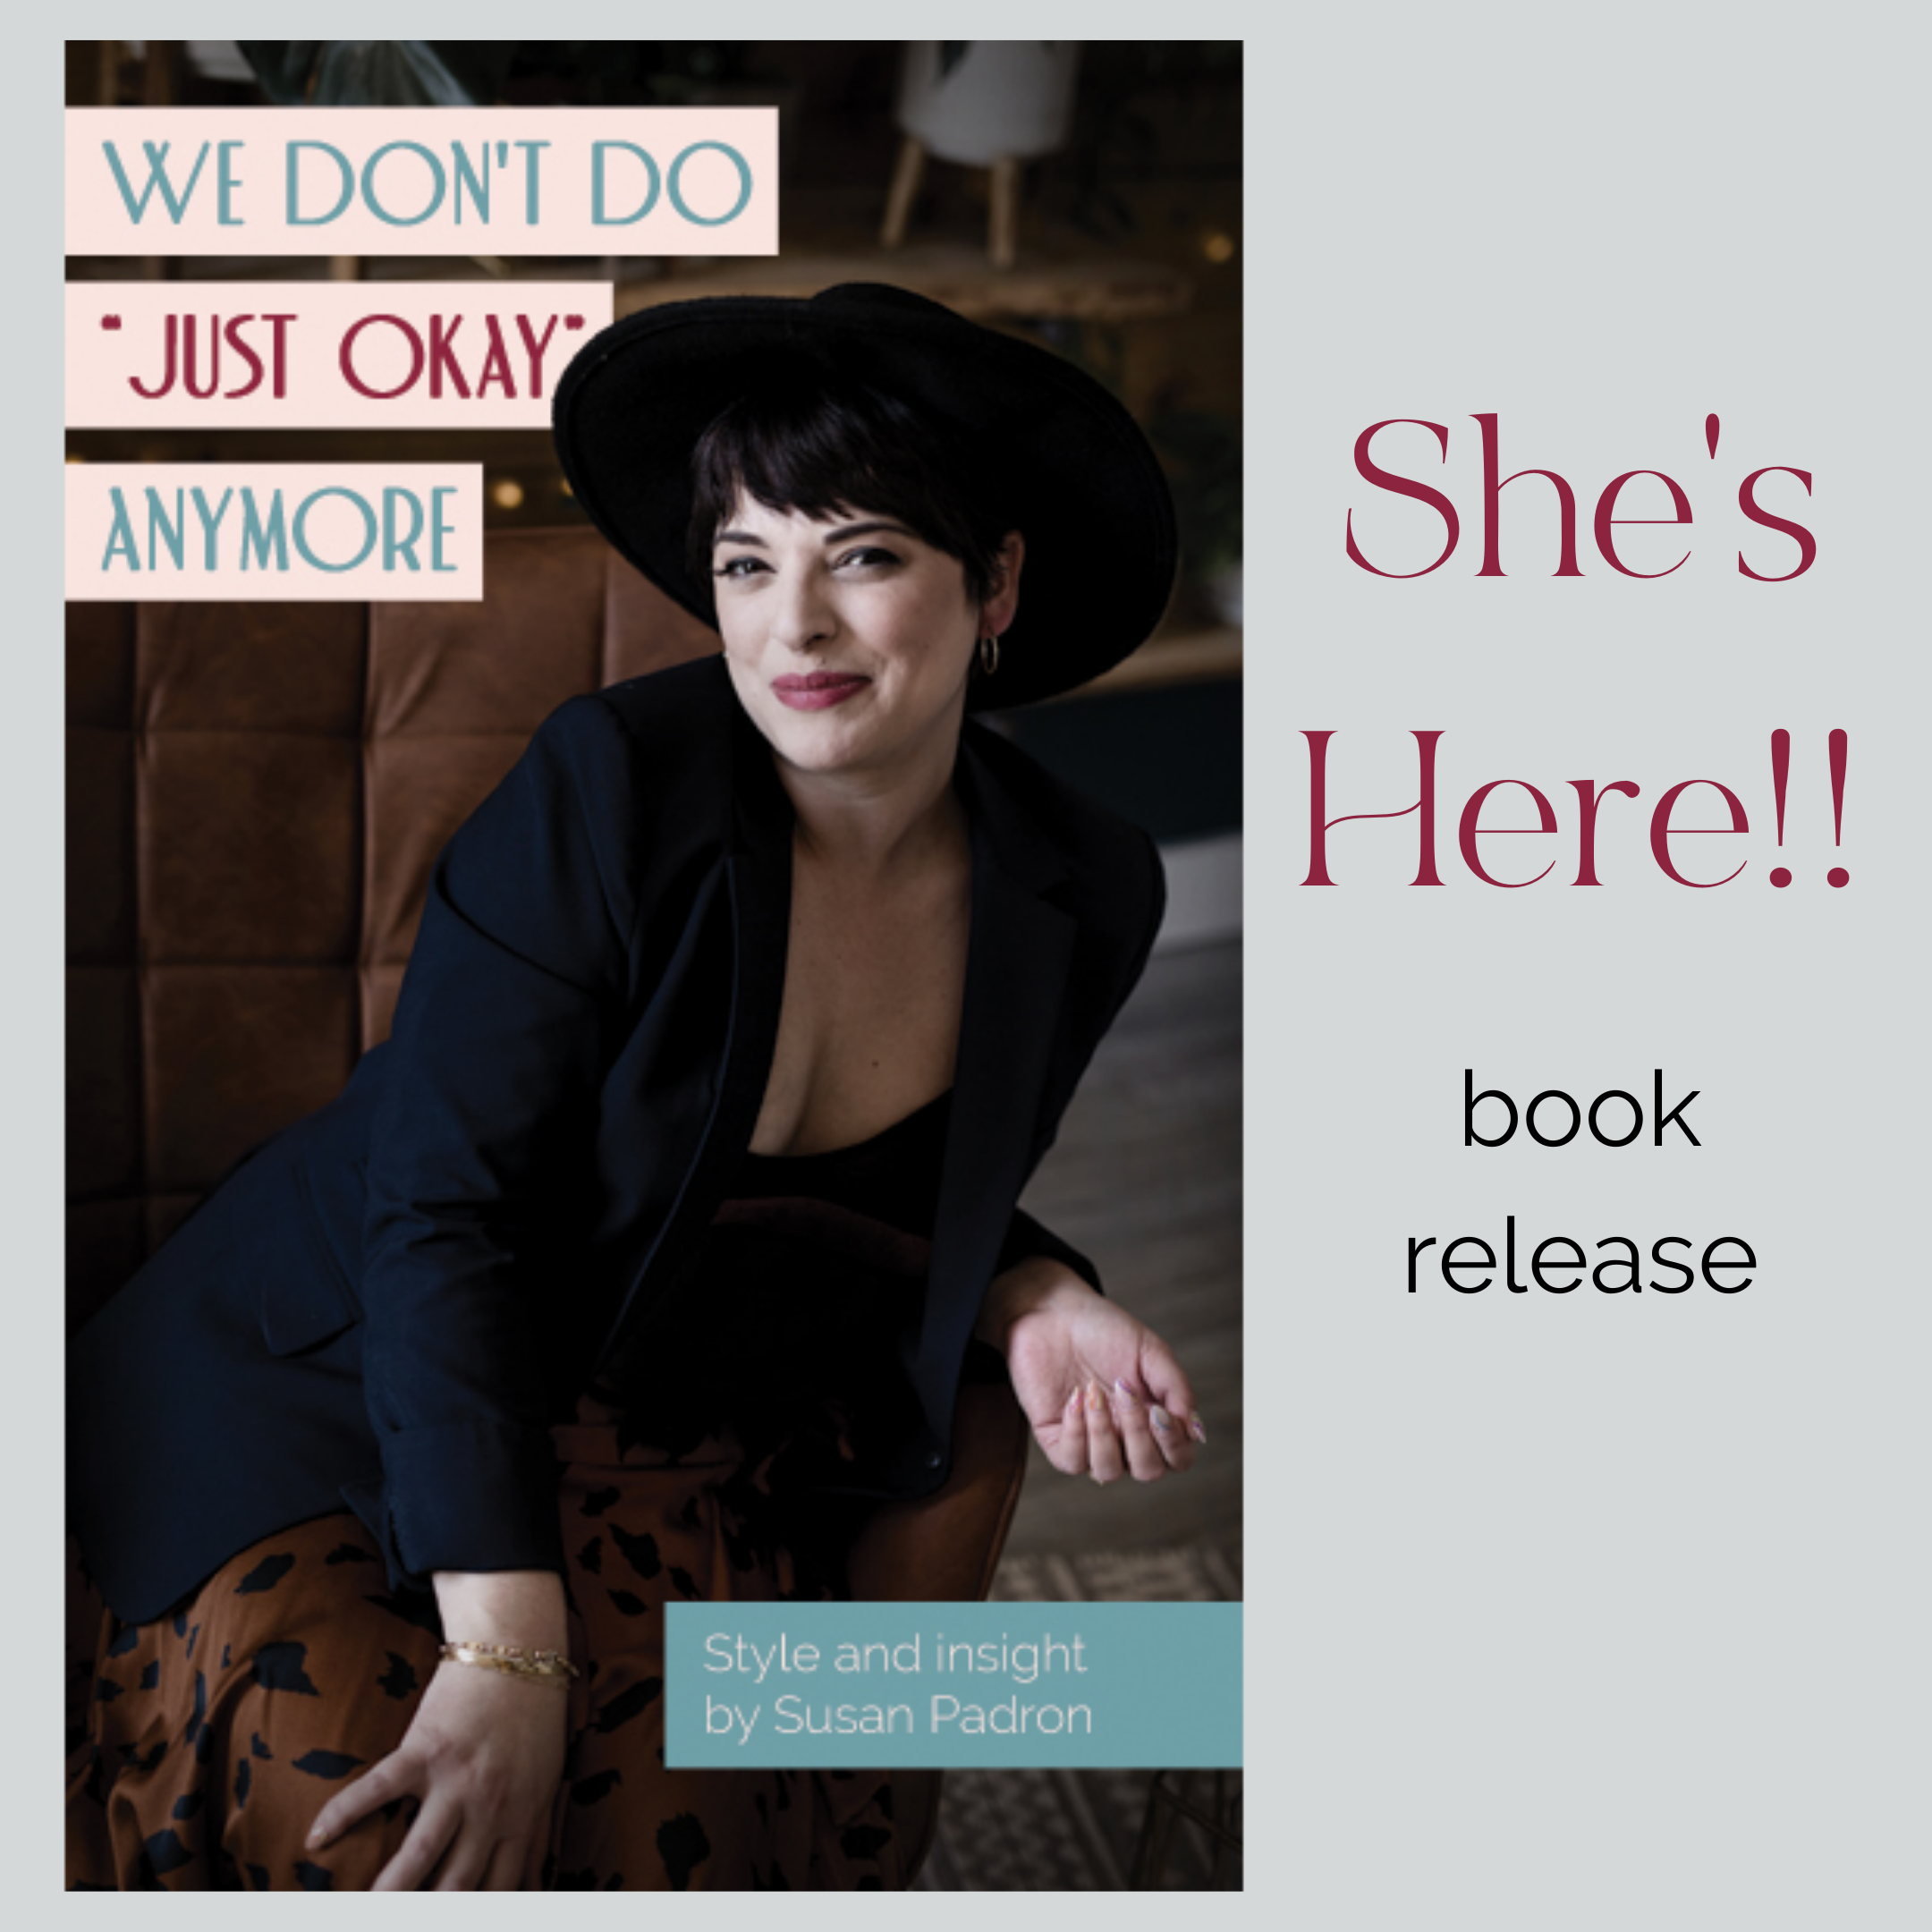 Book Release: We Don't Do "Just Okay" Anymore Style and insight by Susan Padron